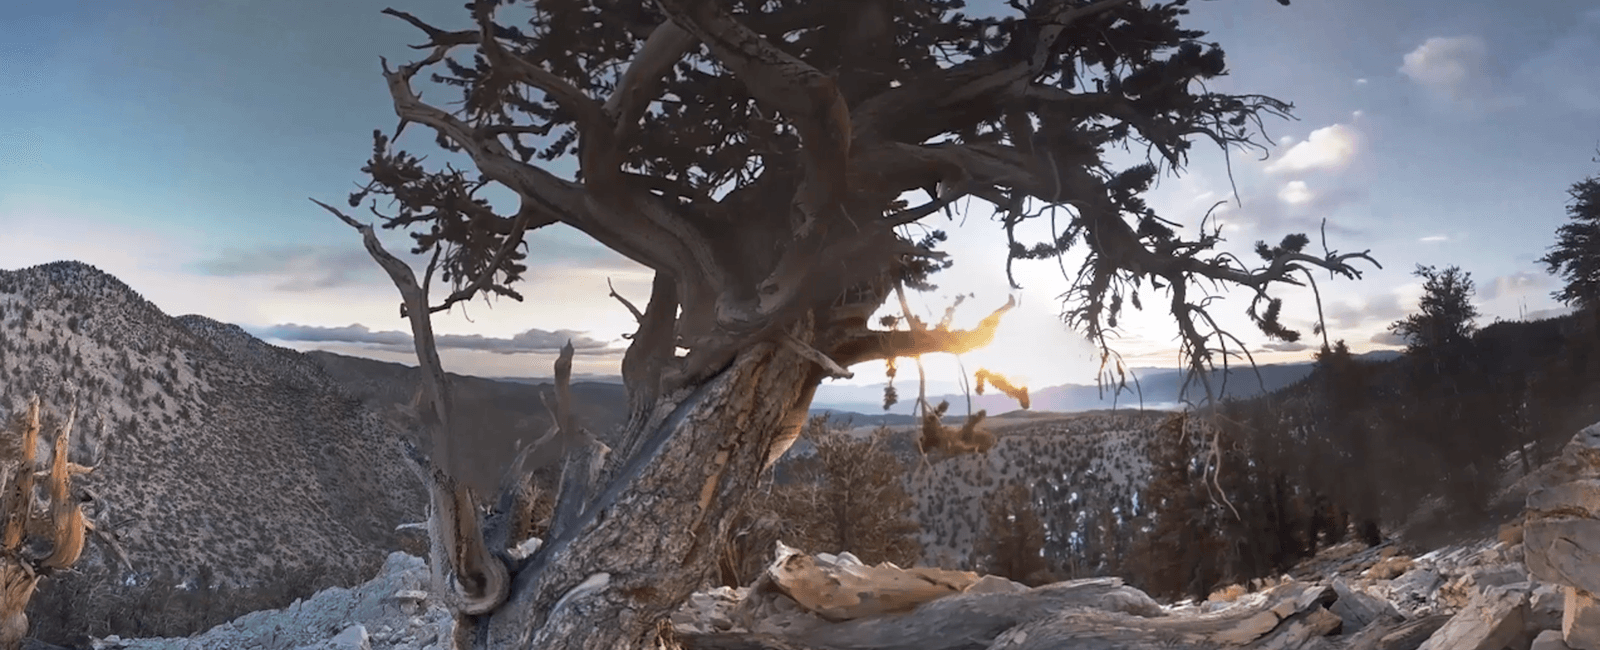 The world s oldest trees are more than 4 600 years old